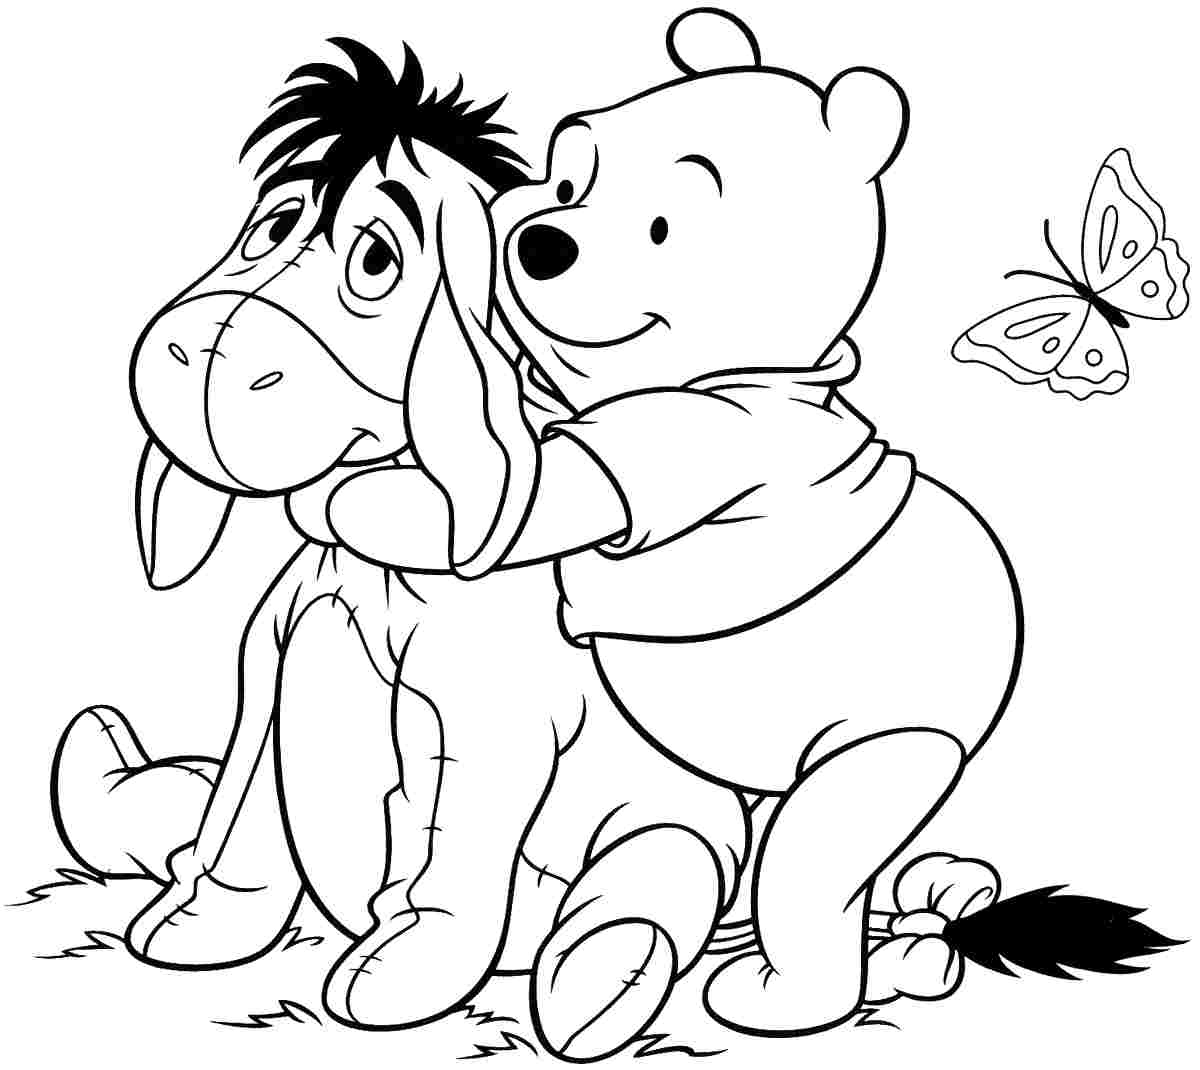 Eeyore Coloring Pages At Getdrawings | Free Download pour Coloriage Bourriquet